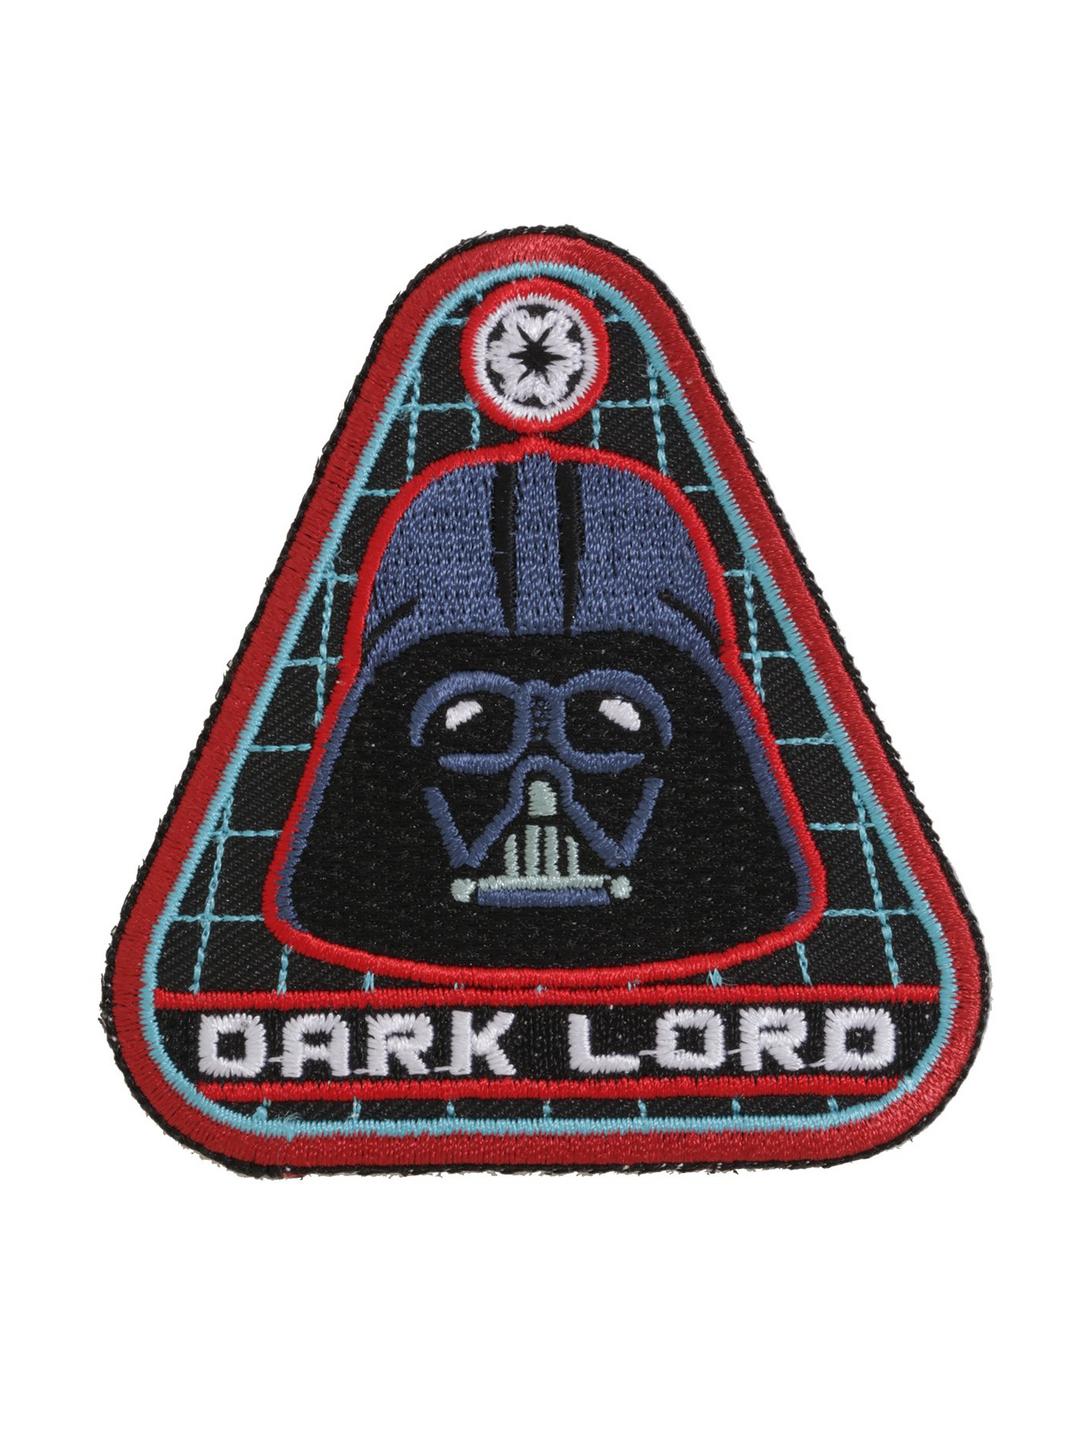 Star Wars Dark Lord Triangle Iron-On Patch, , hi-res